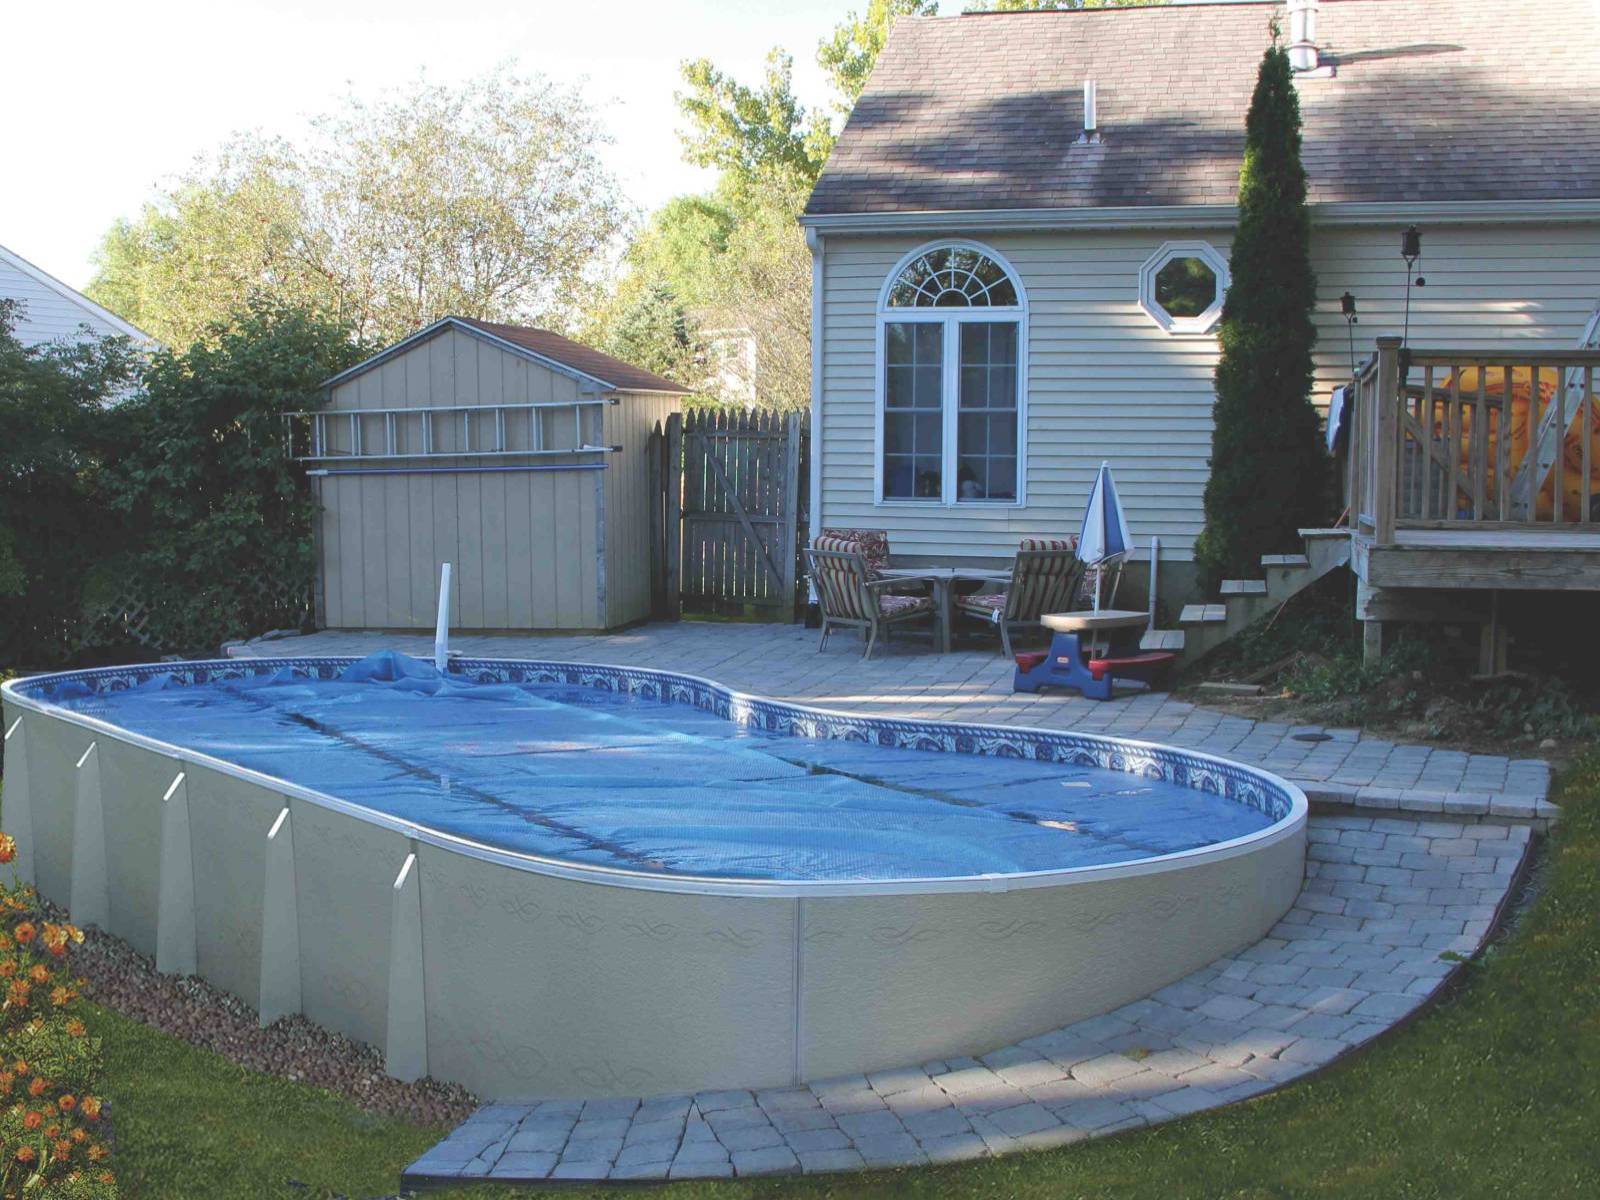 19 Amazing Above-Ground Swimming Pool Ideas - A Variety For Every Taste